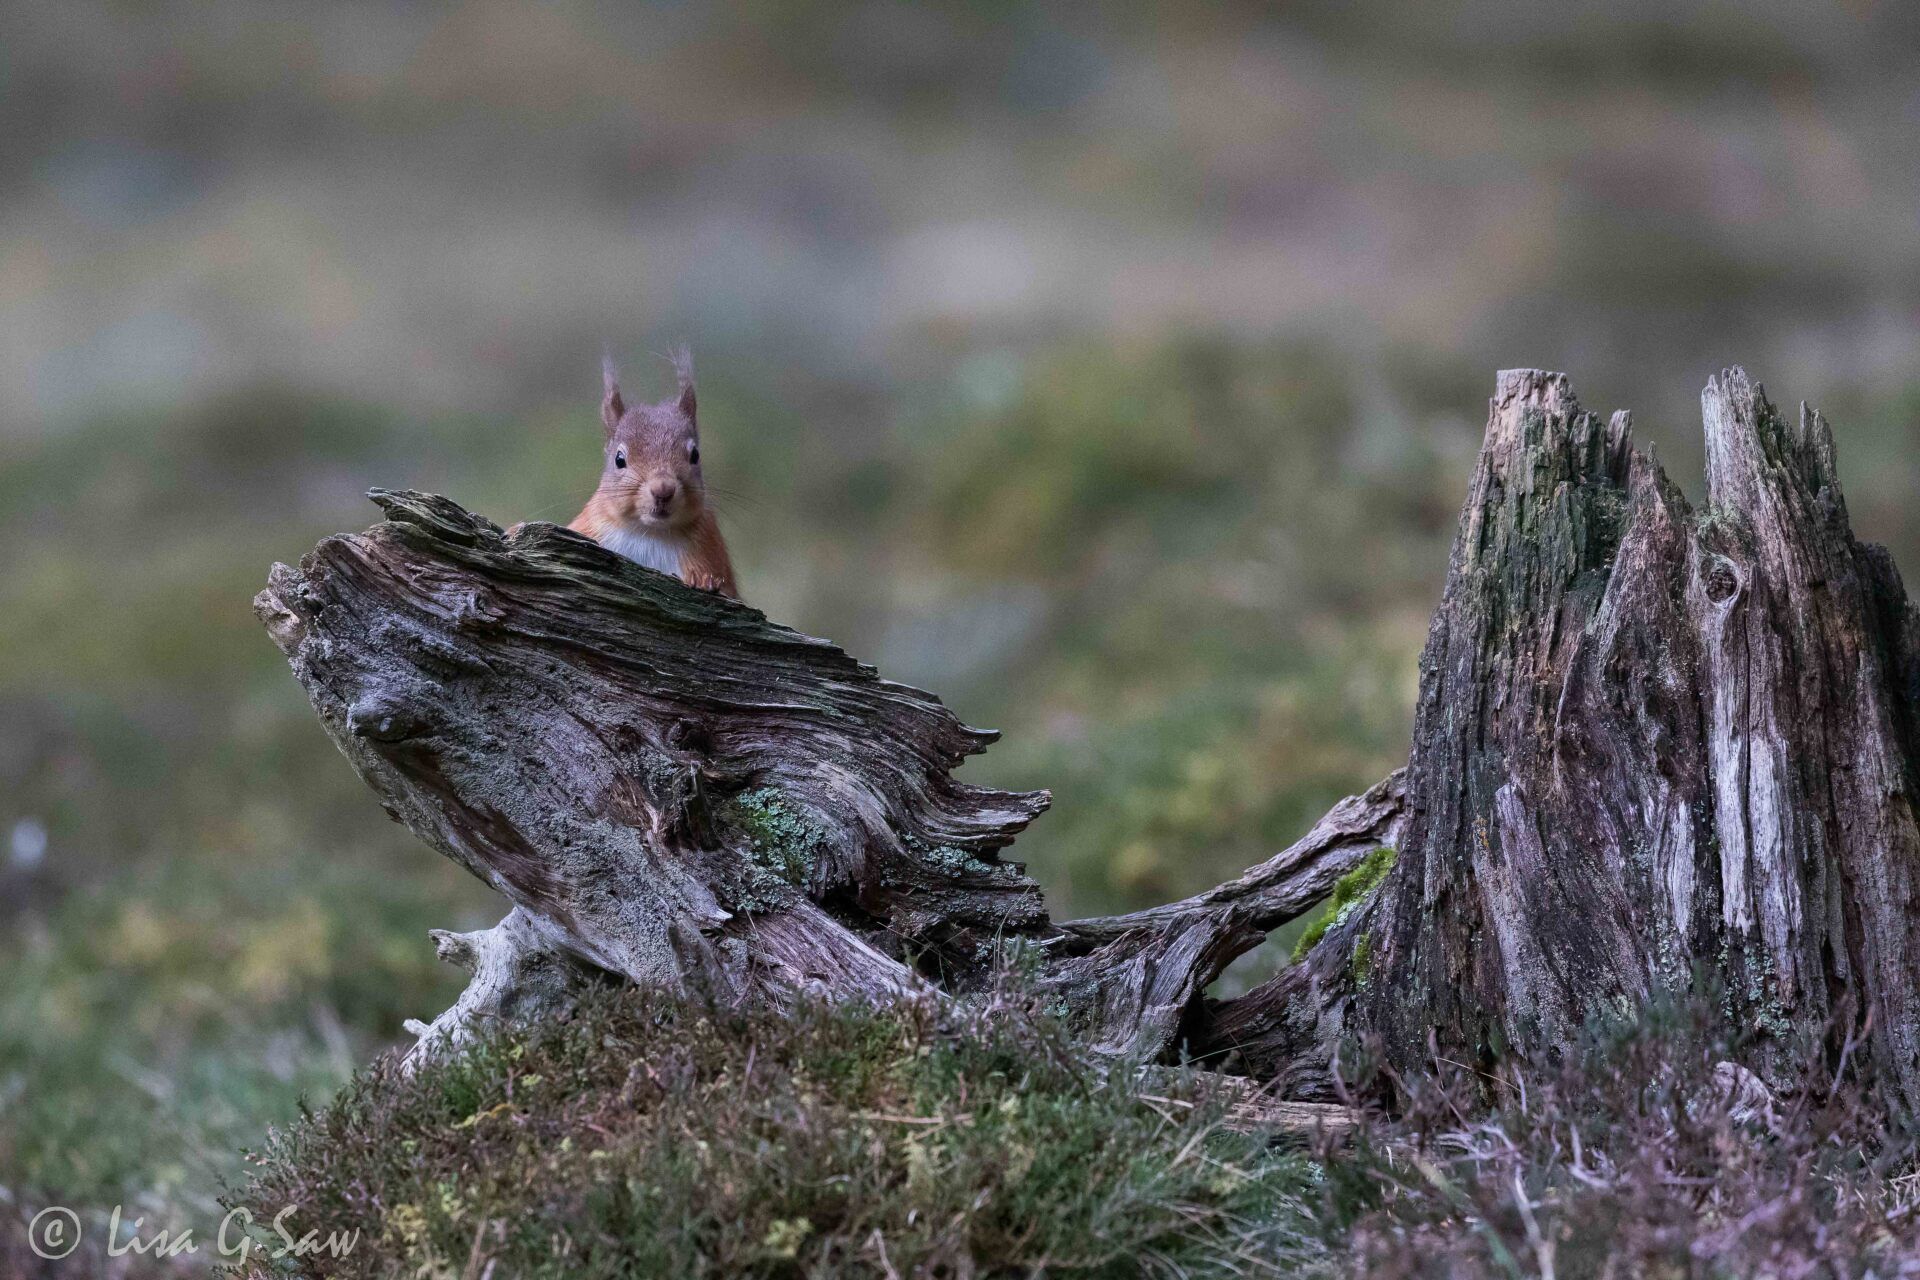 Red Squirrel peering up from behind tree stump